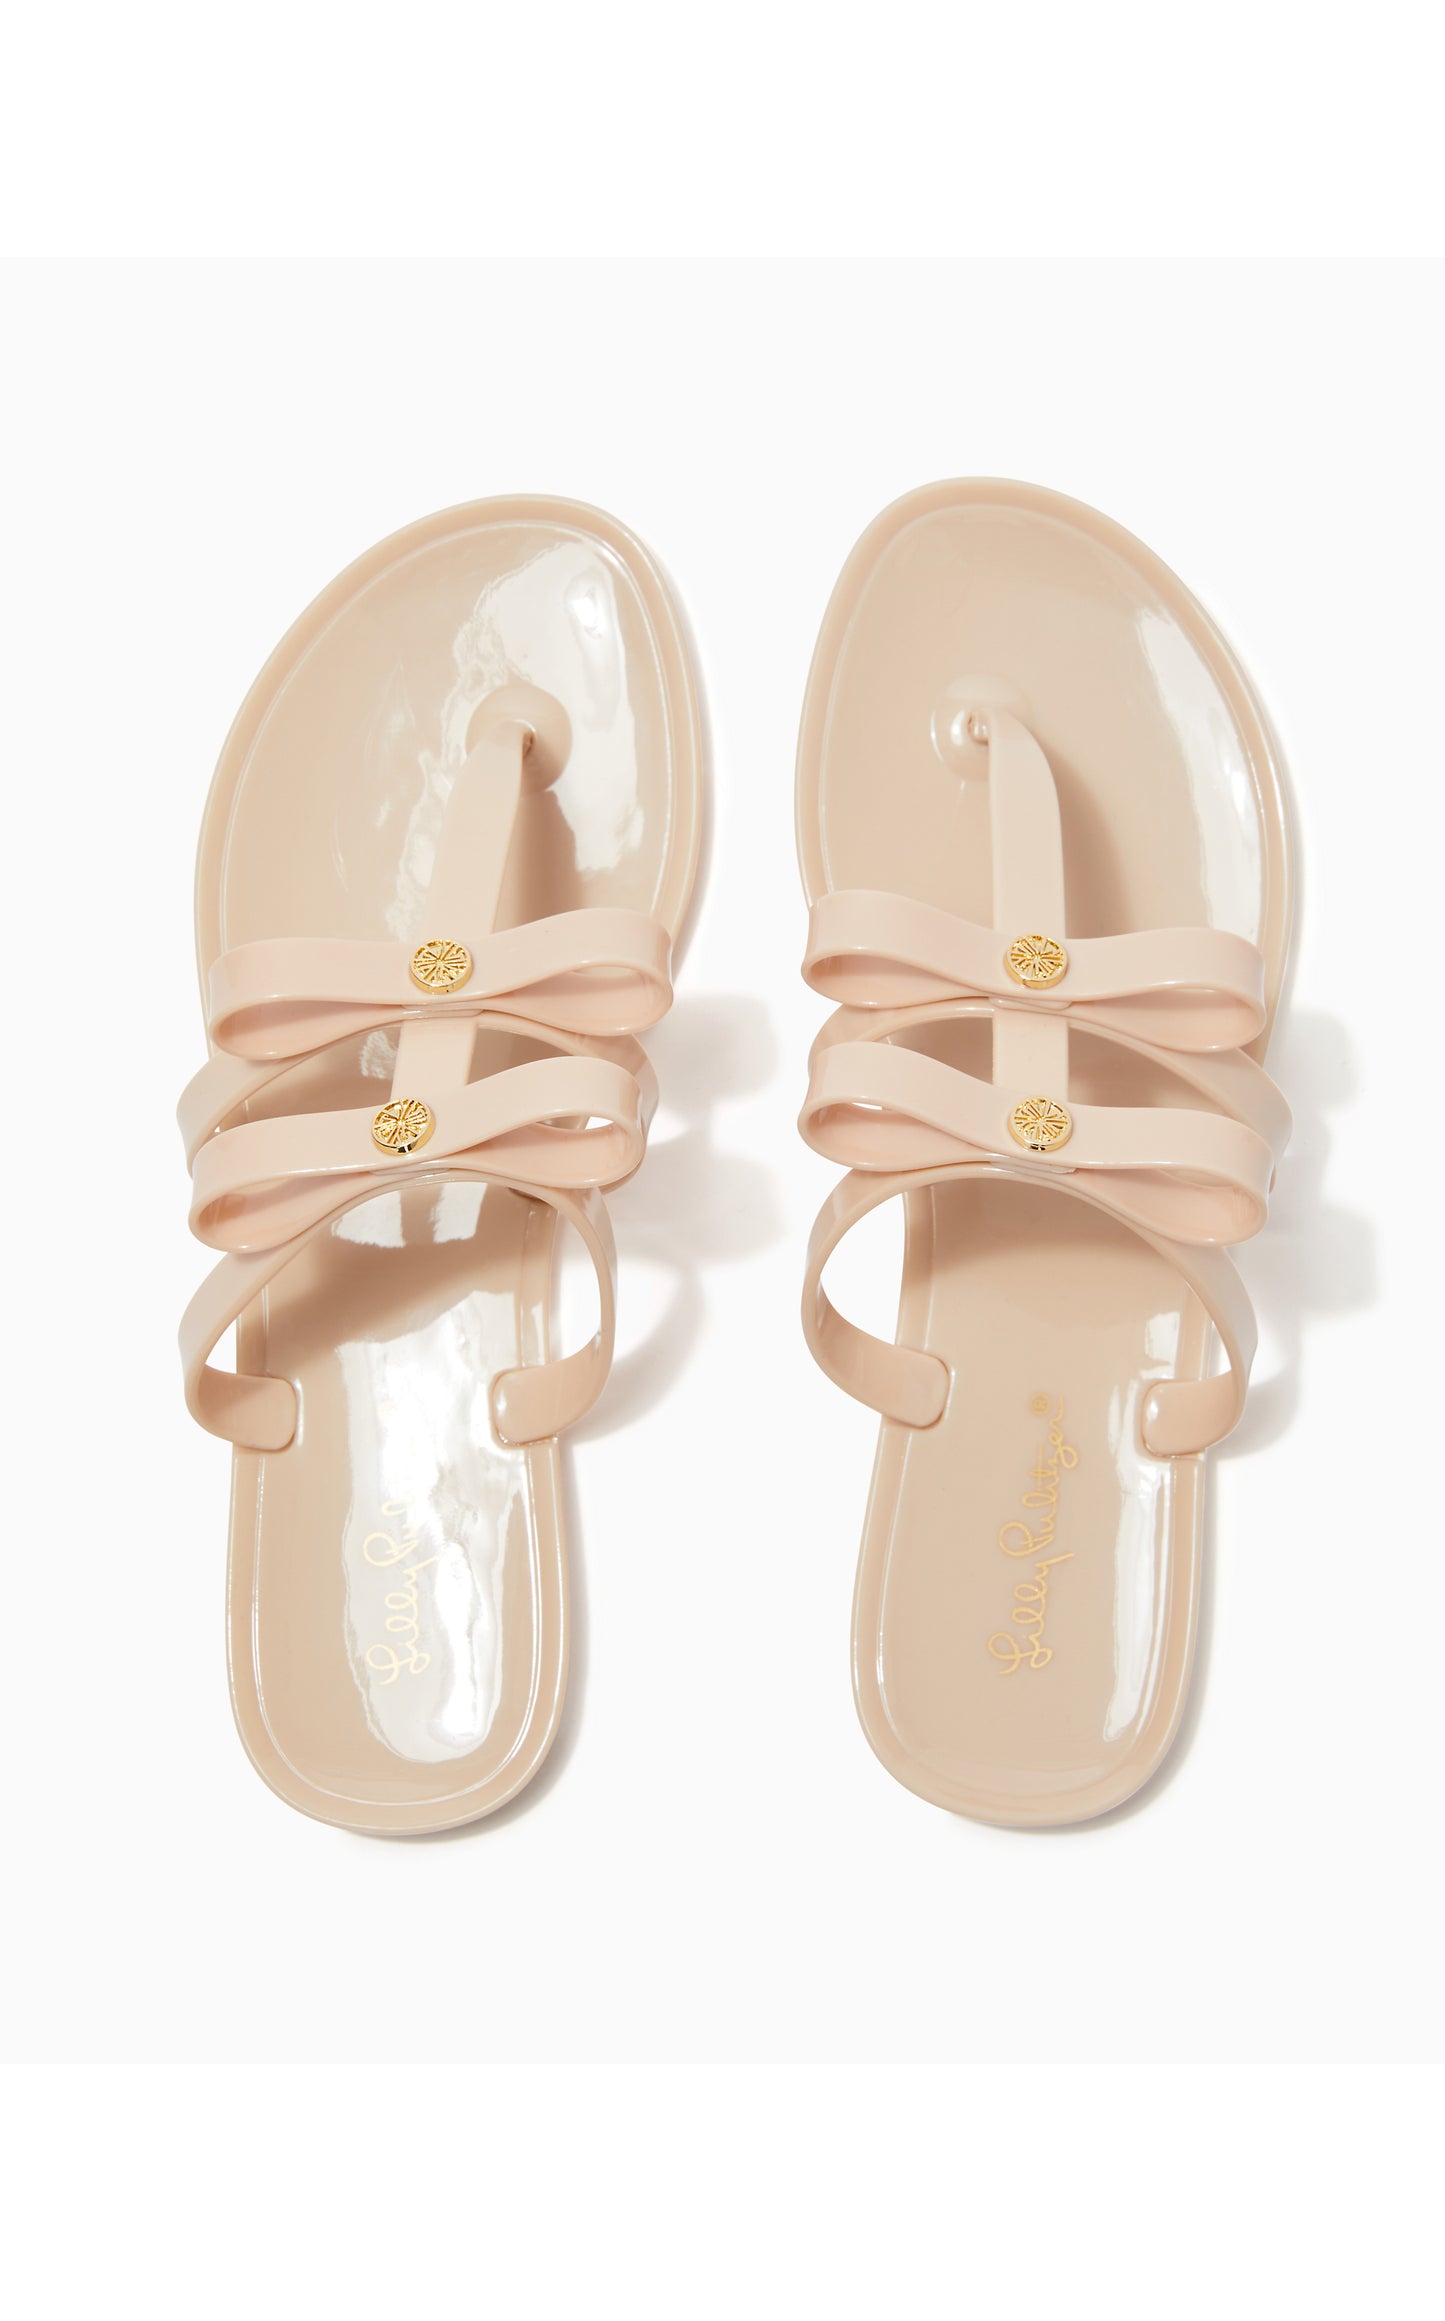 Harlow Jelly Sandal in Nude